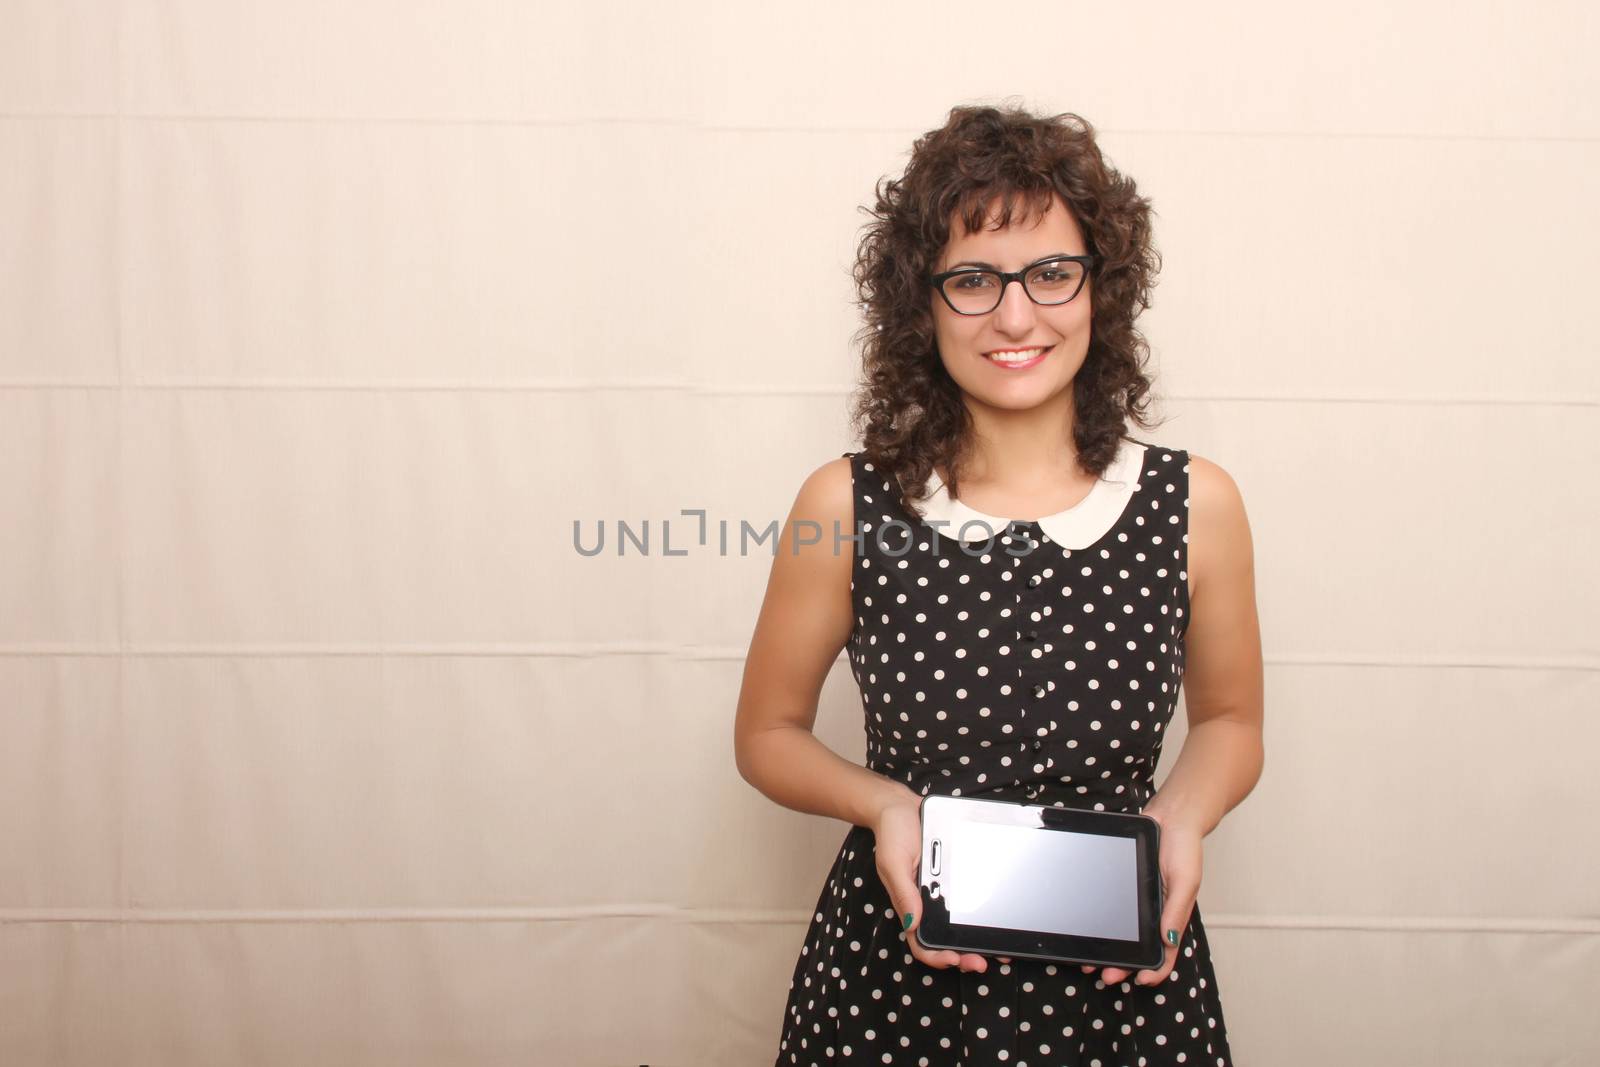 A young woman in a Retro dress holding a Tablet PC.